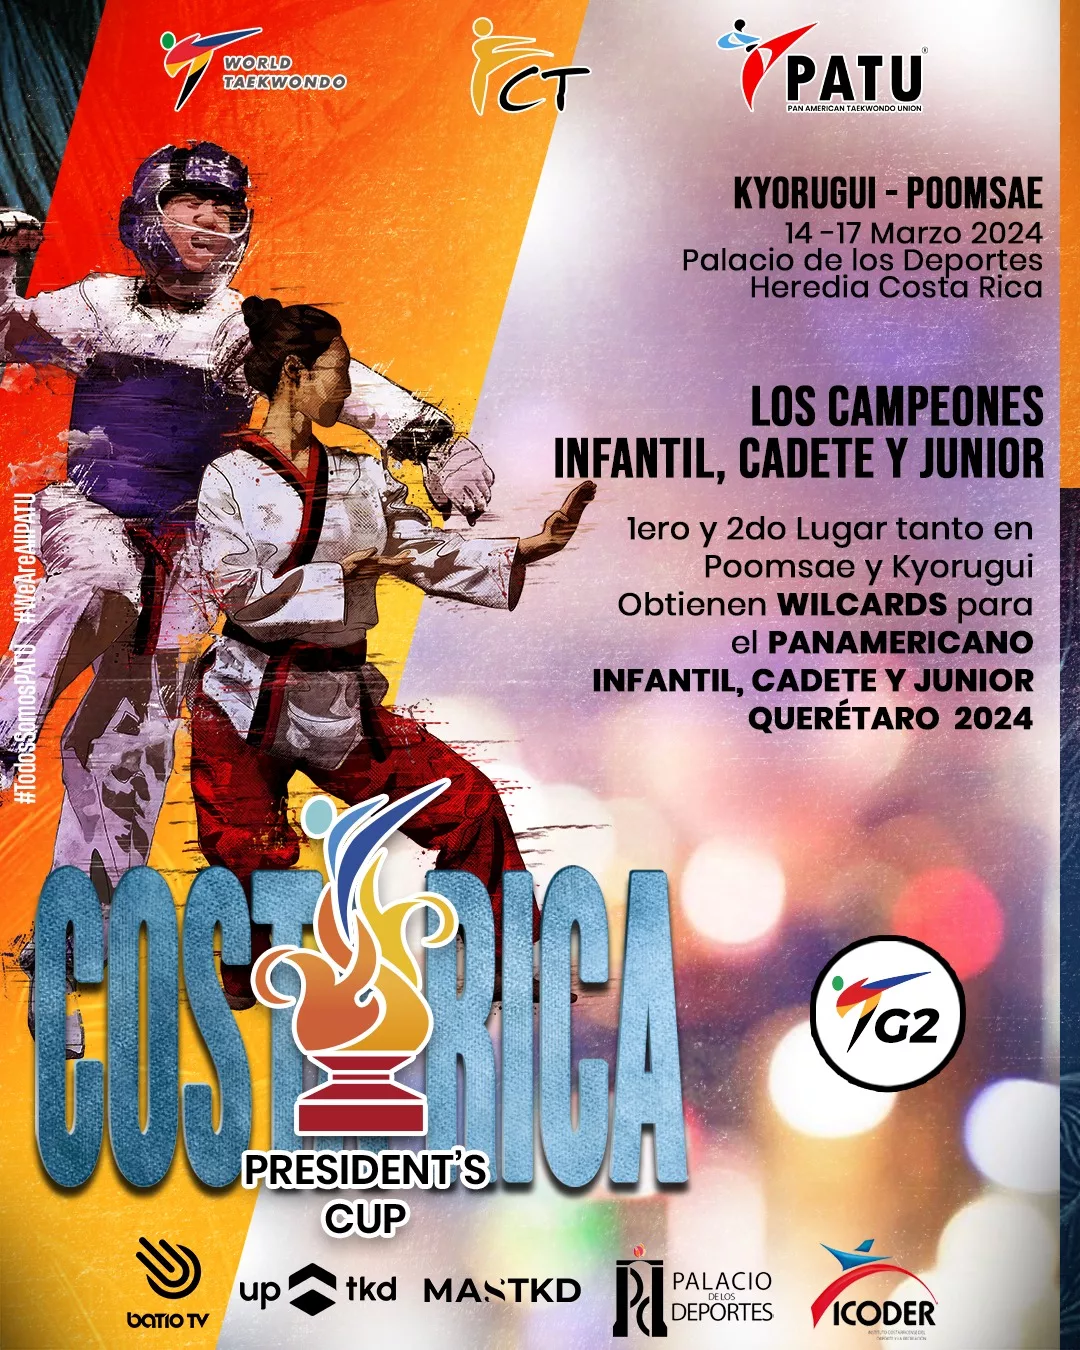 Wild Cards in President's Cup: Direct quotas to the pinnacle of Pan-American Taekwondo events